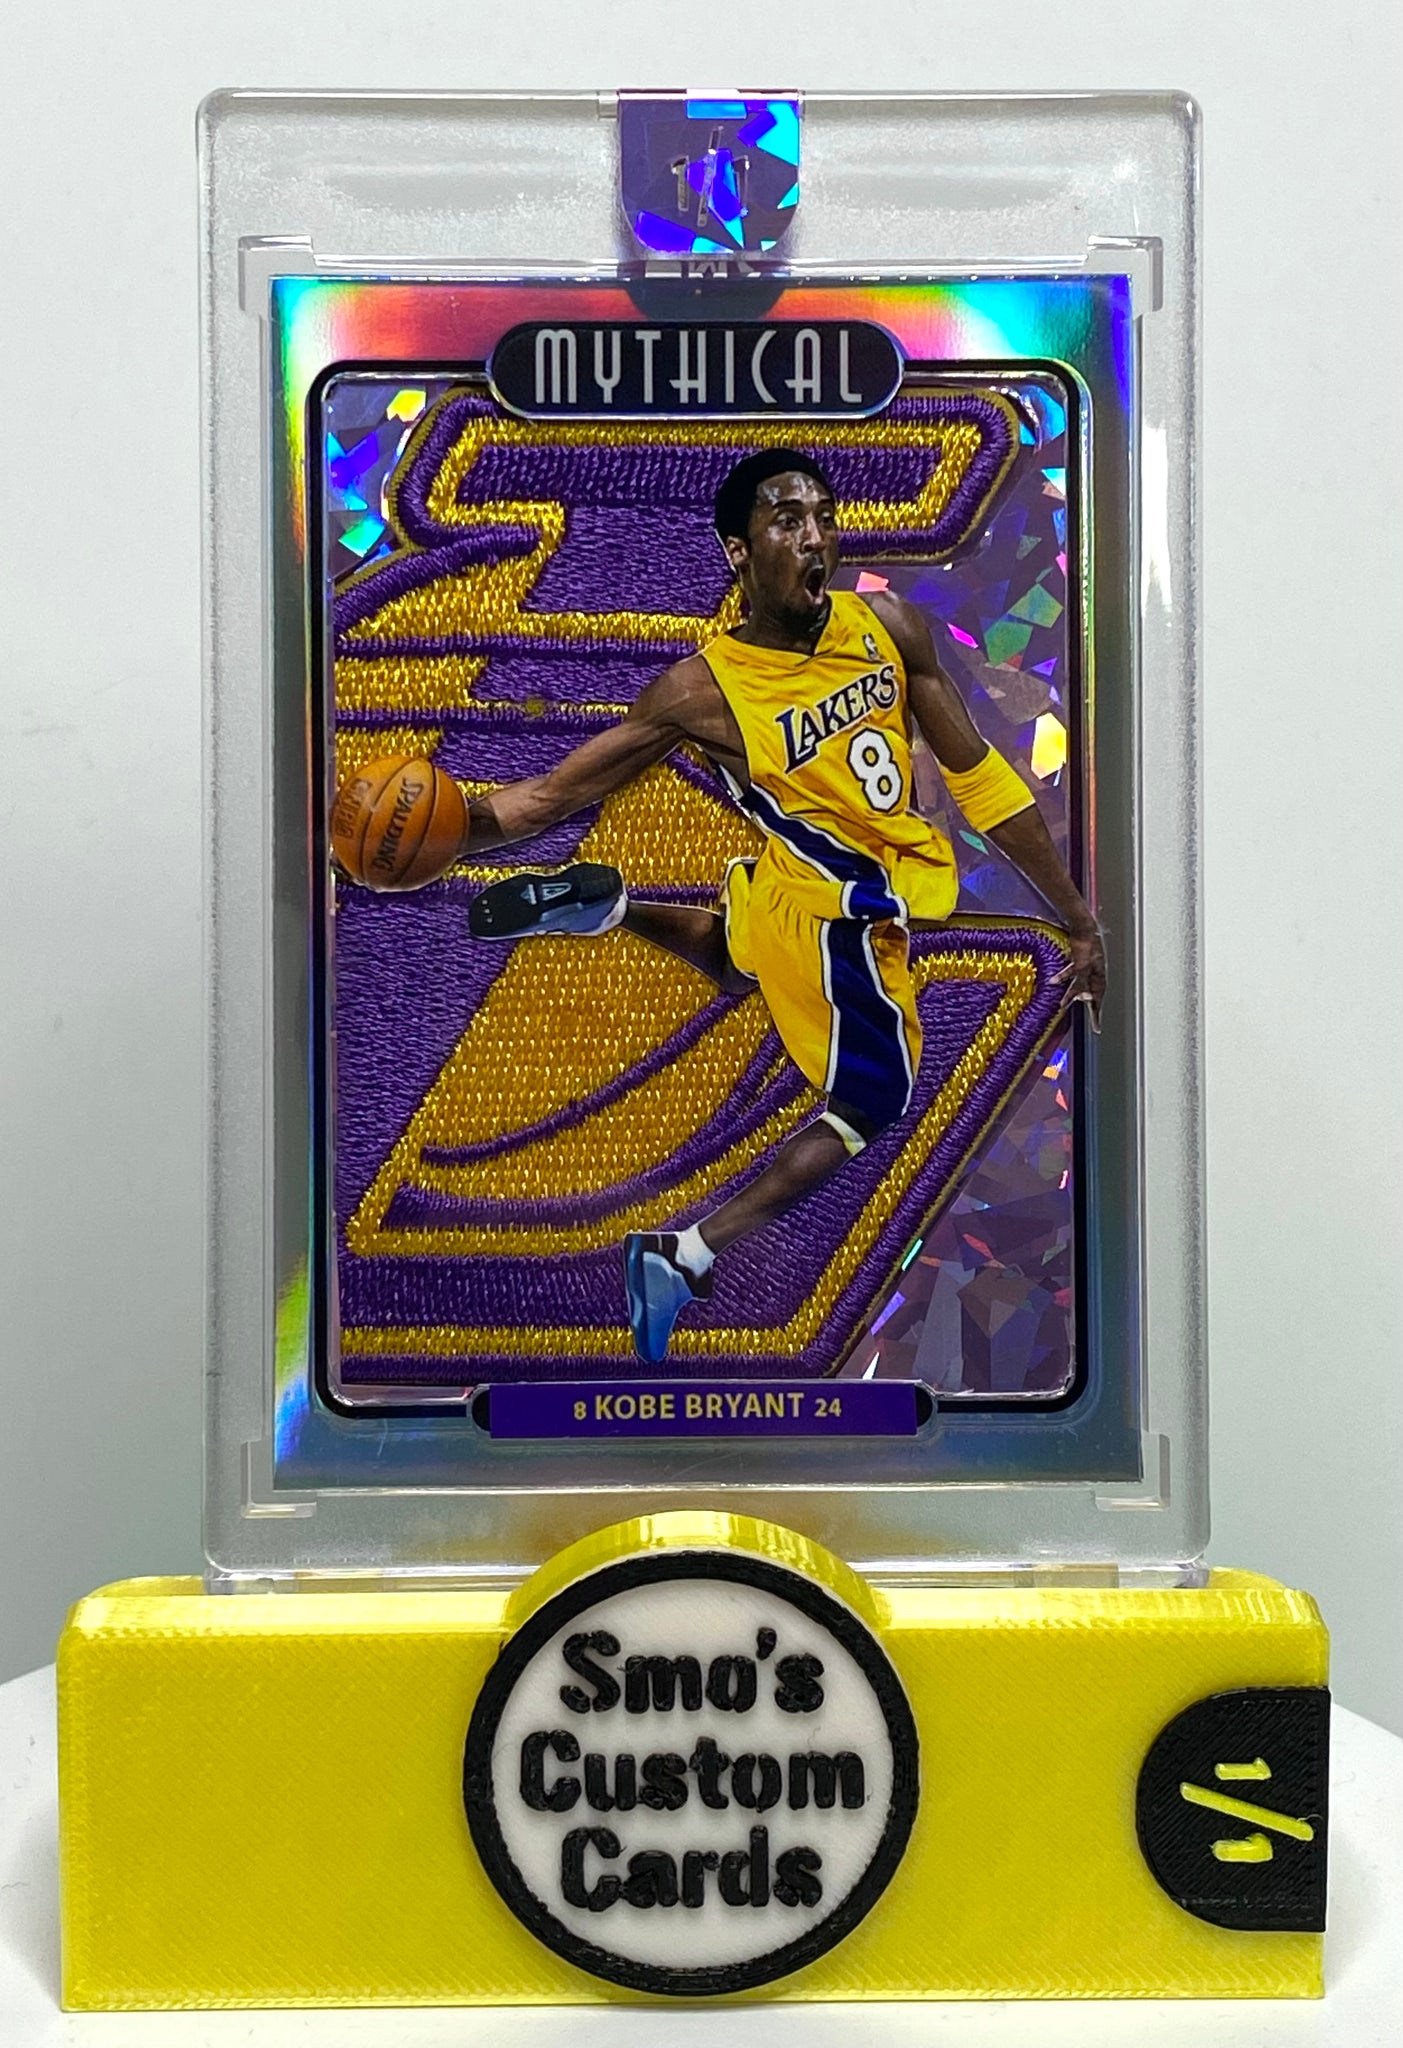 Kobe Bryant Mythical Holo Dunk Lakers Patch 1/1